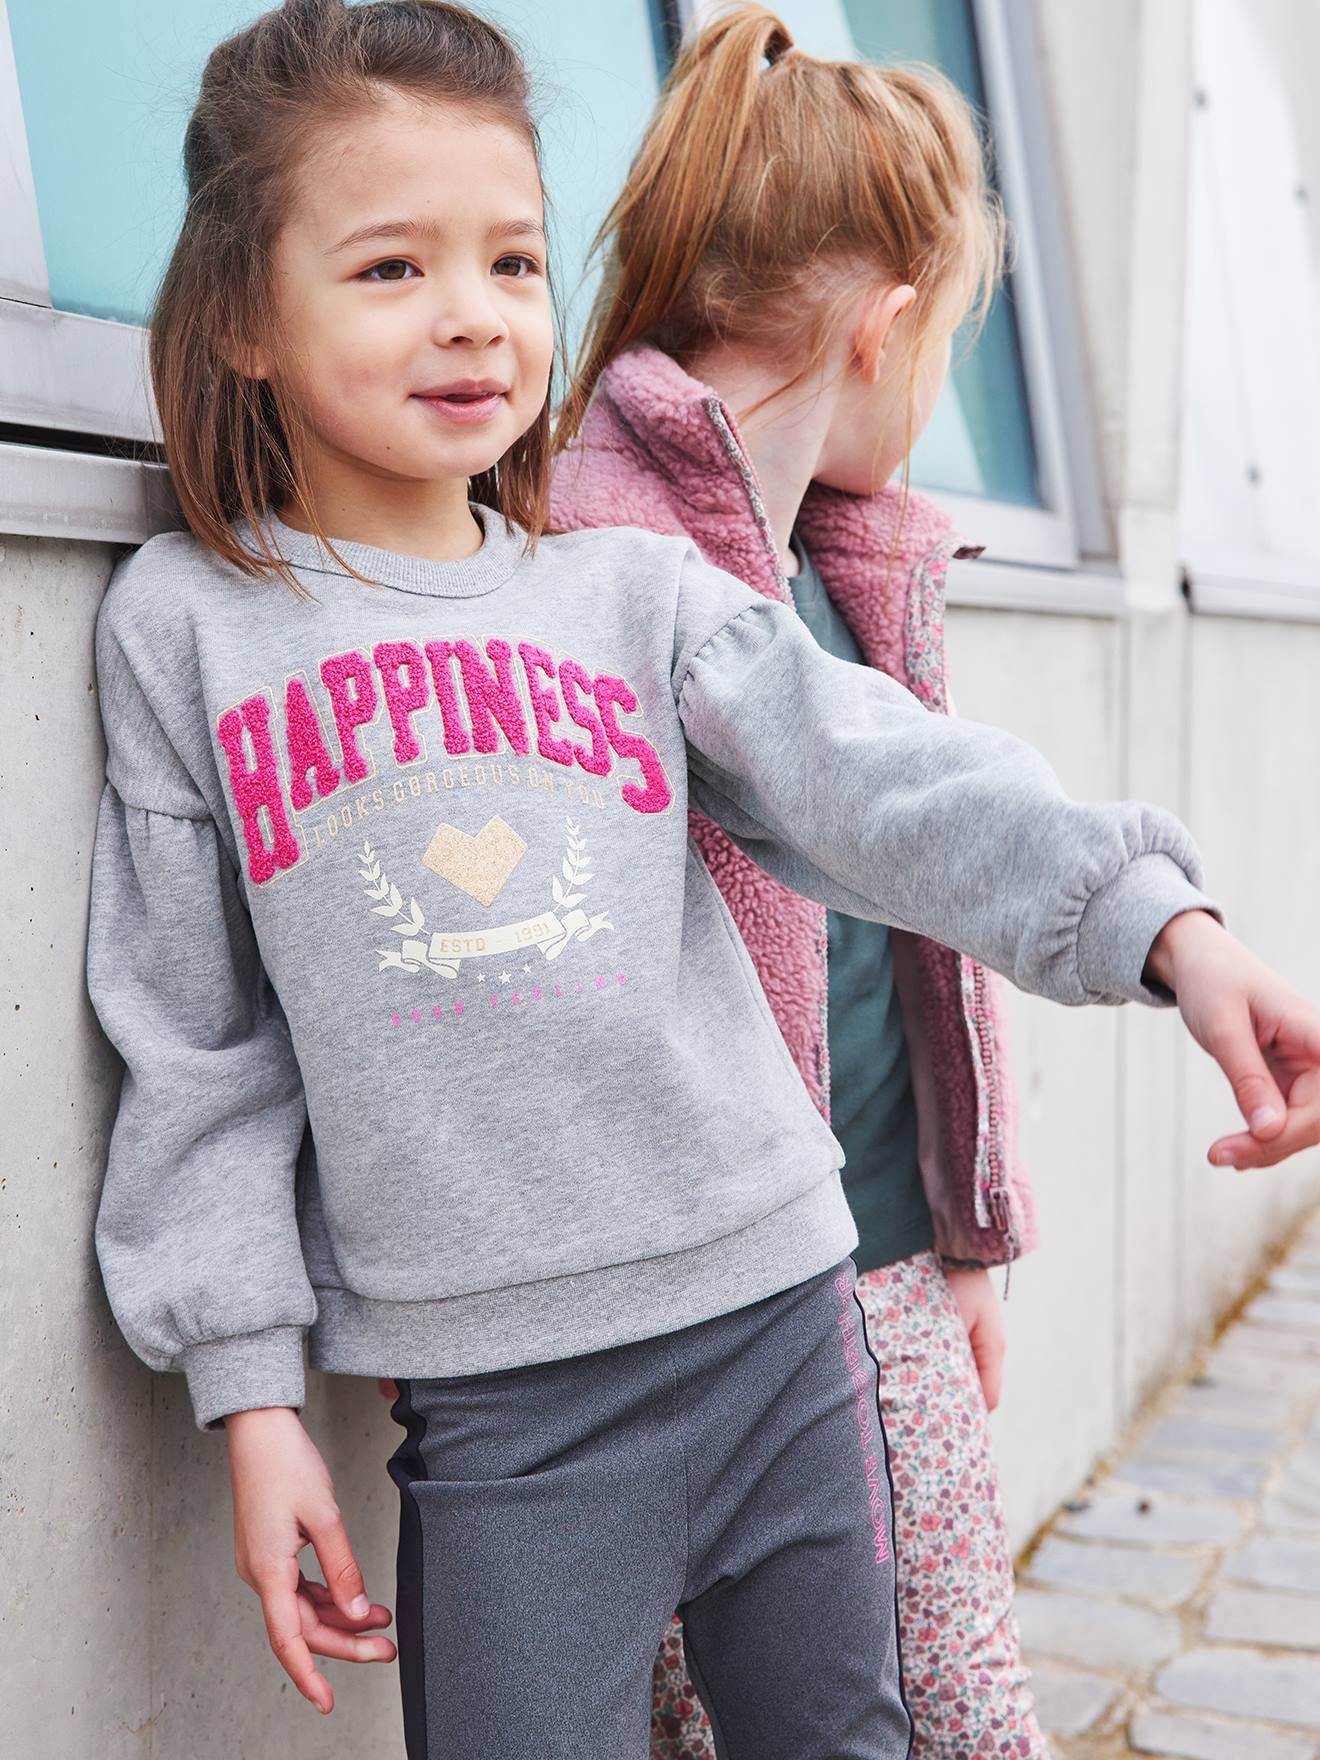 Sports Sweatshirt "Happiness", in Boucle Knit & Iridescent Details, for Girls marl grey